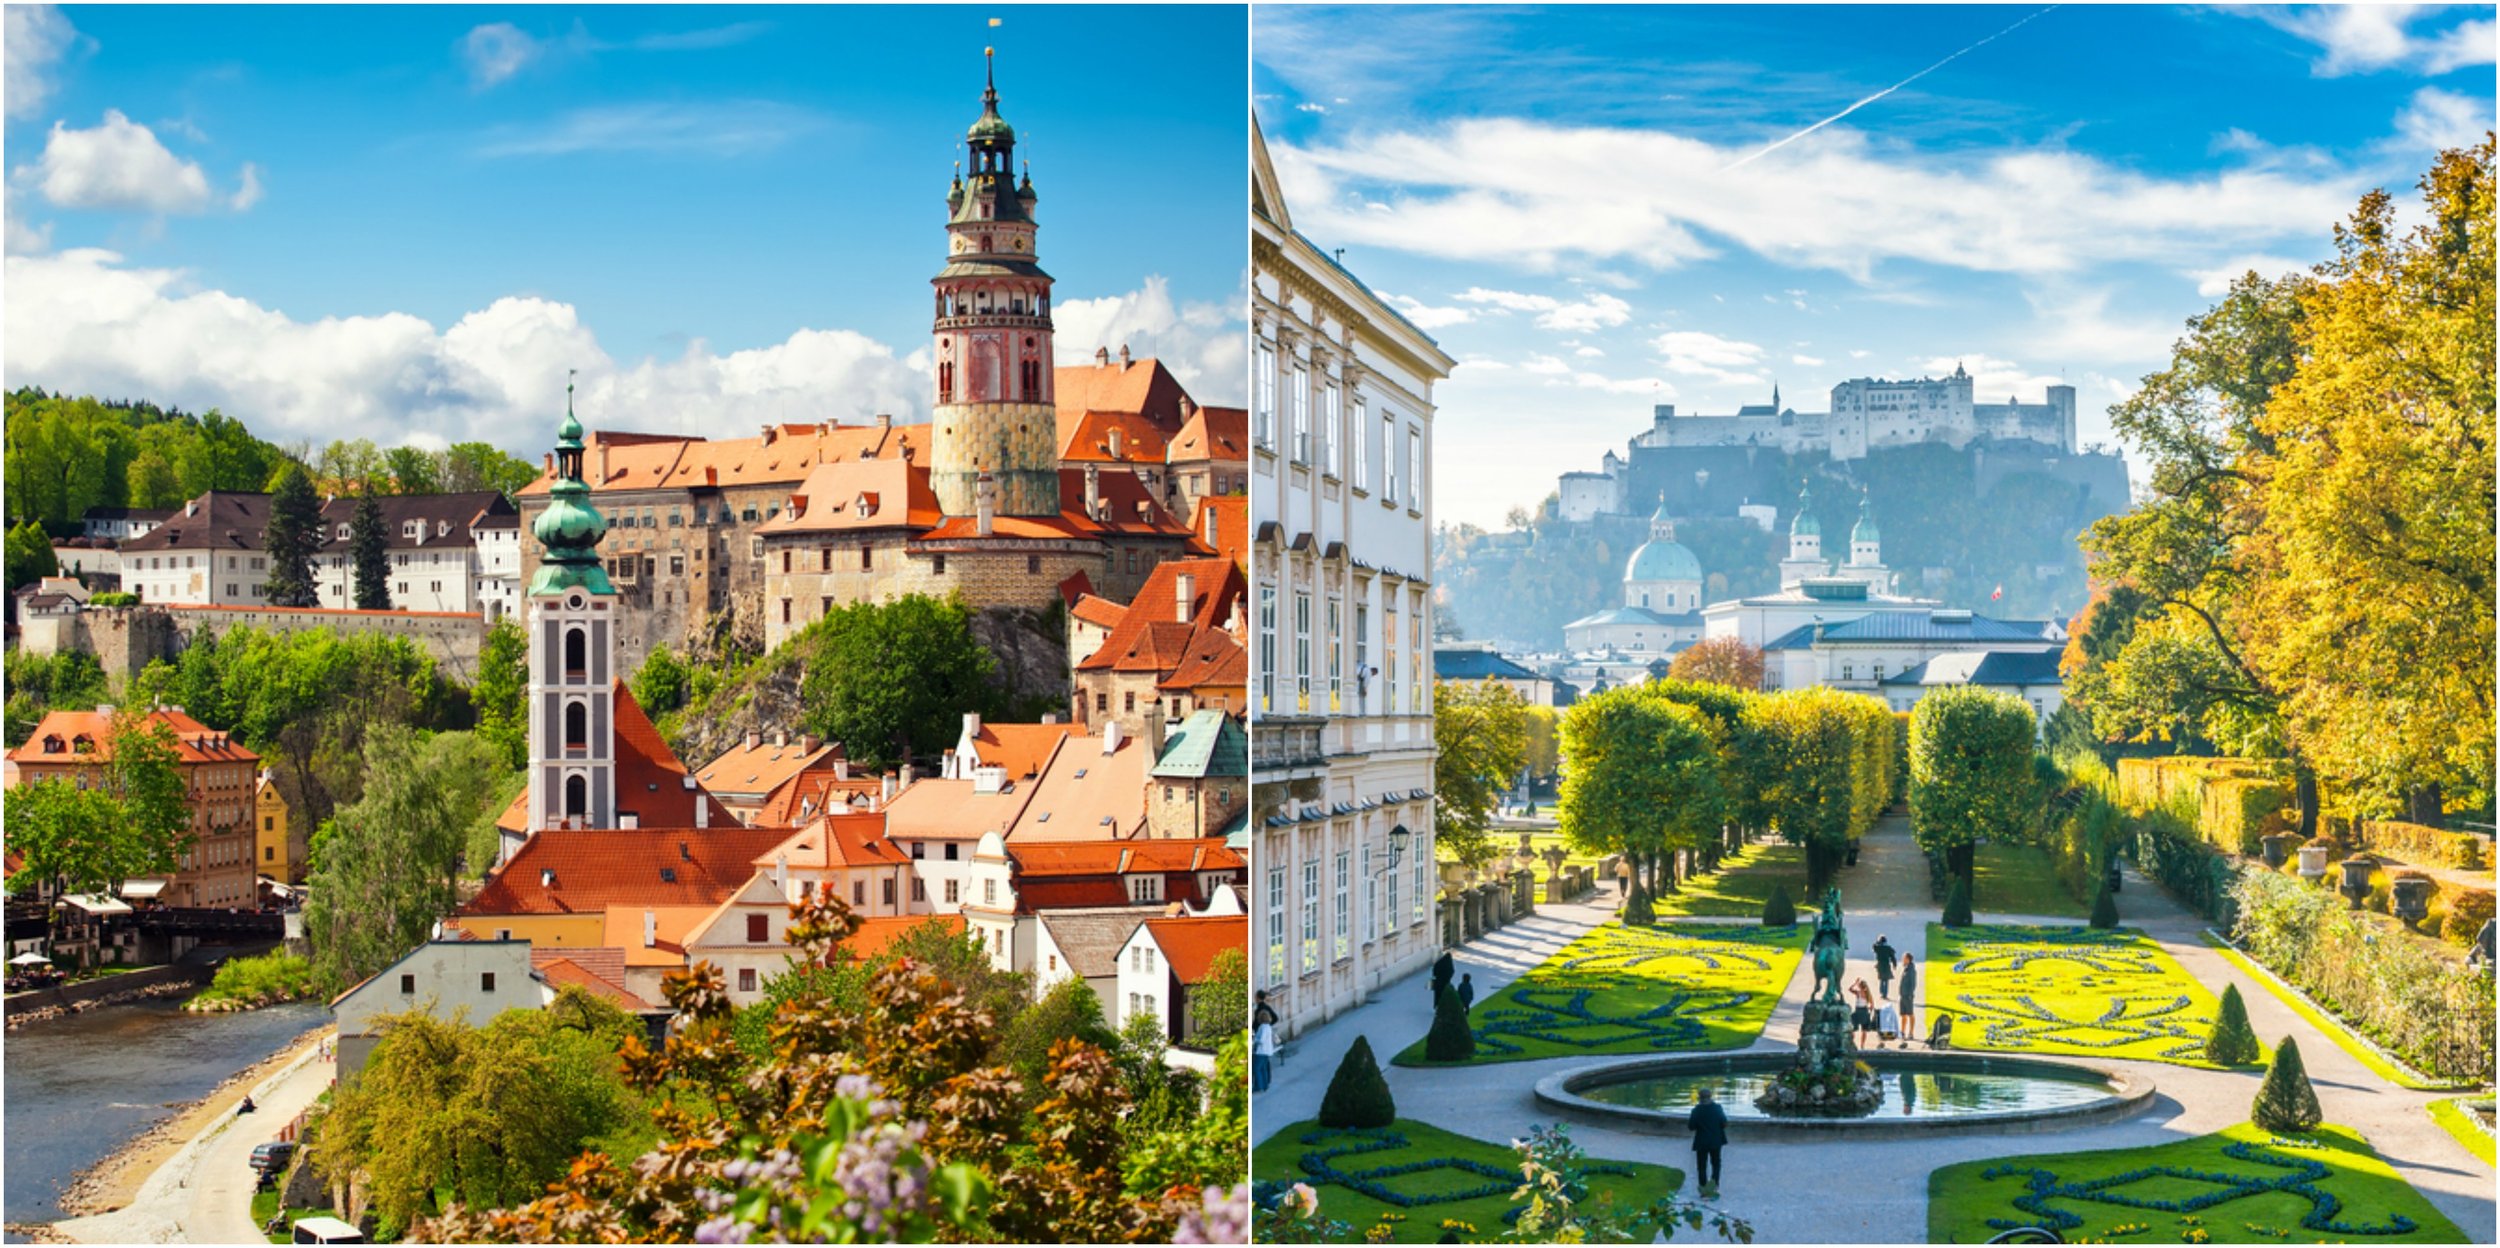 Although different countries, the beautiful town of Cesky Krumlov in the Czech Republic (top) is only just over two hours drive from Salzburg (bottom) in Austria.